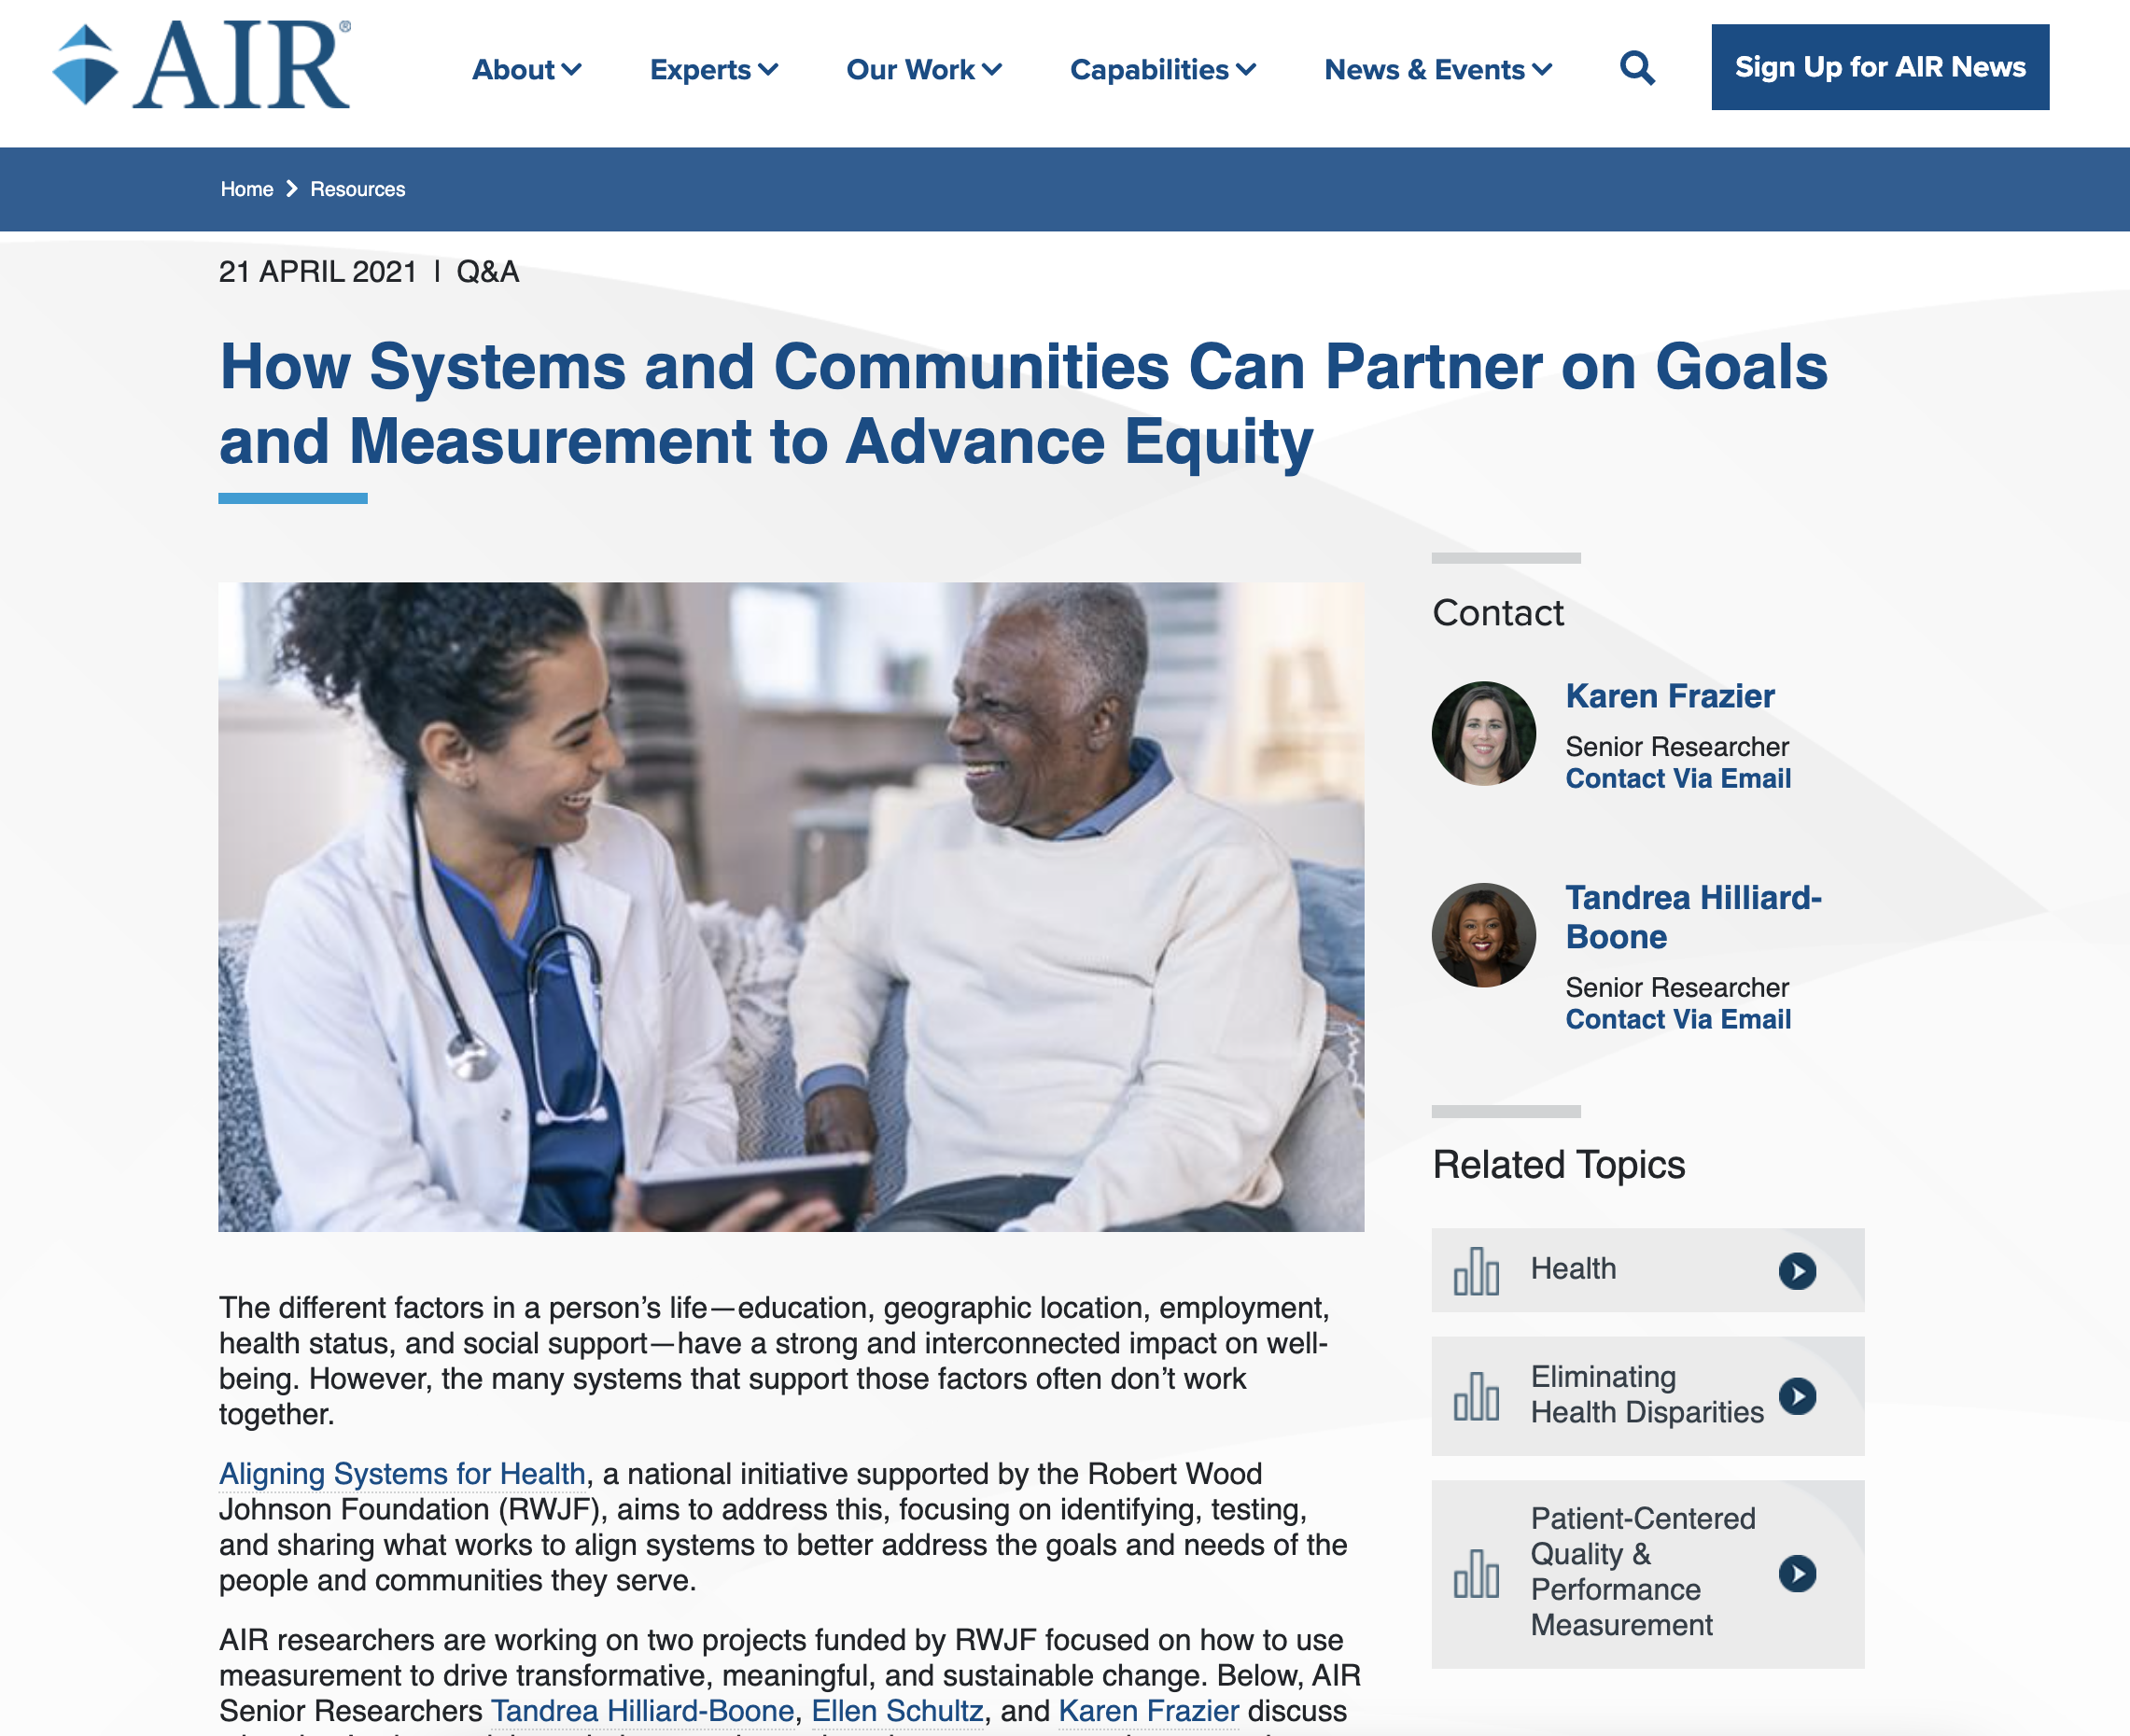 How Systems and Communities Can Partner on Goals and Measurement to Advance Equity